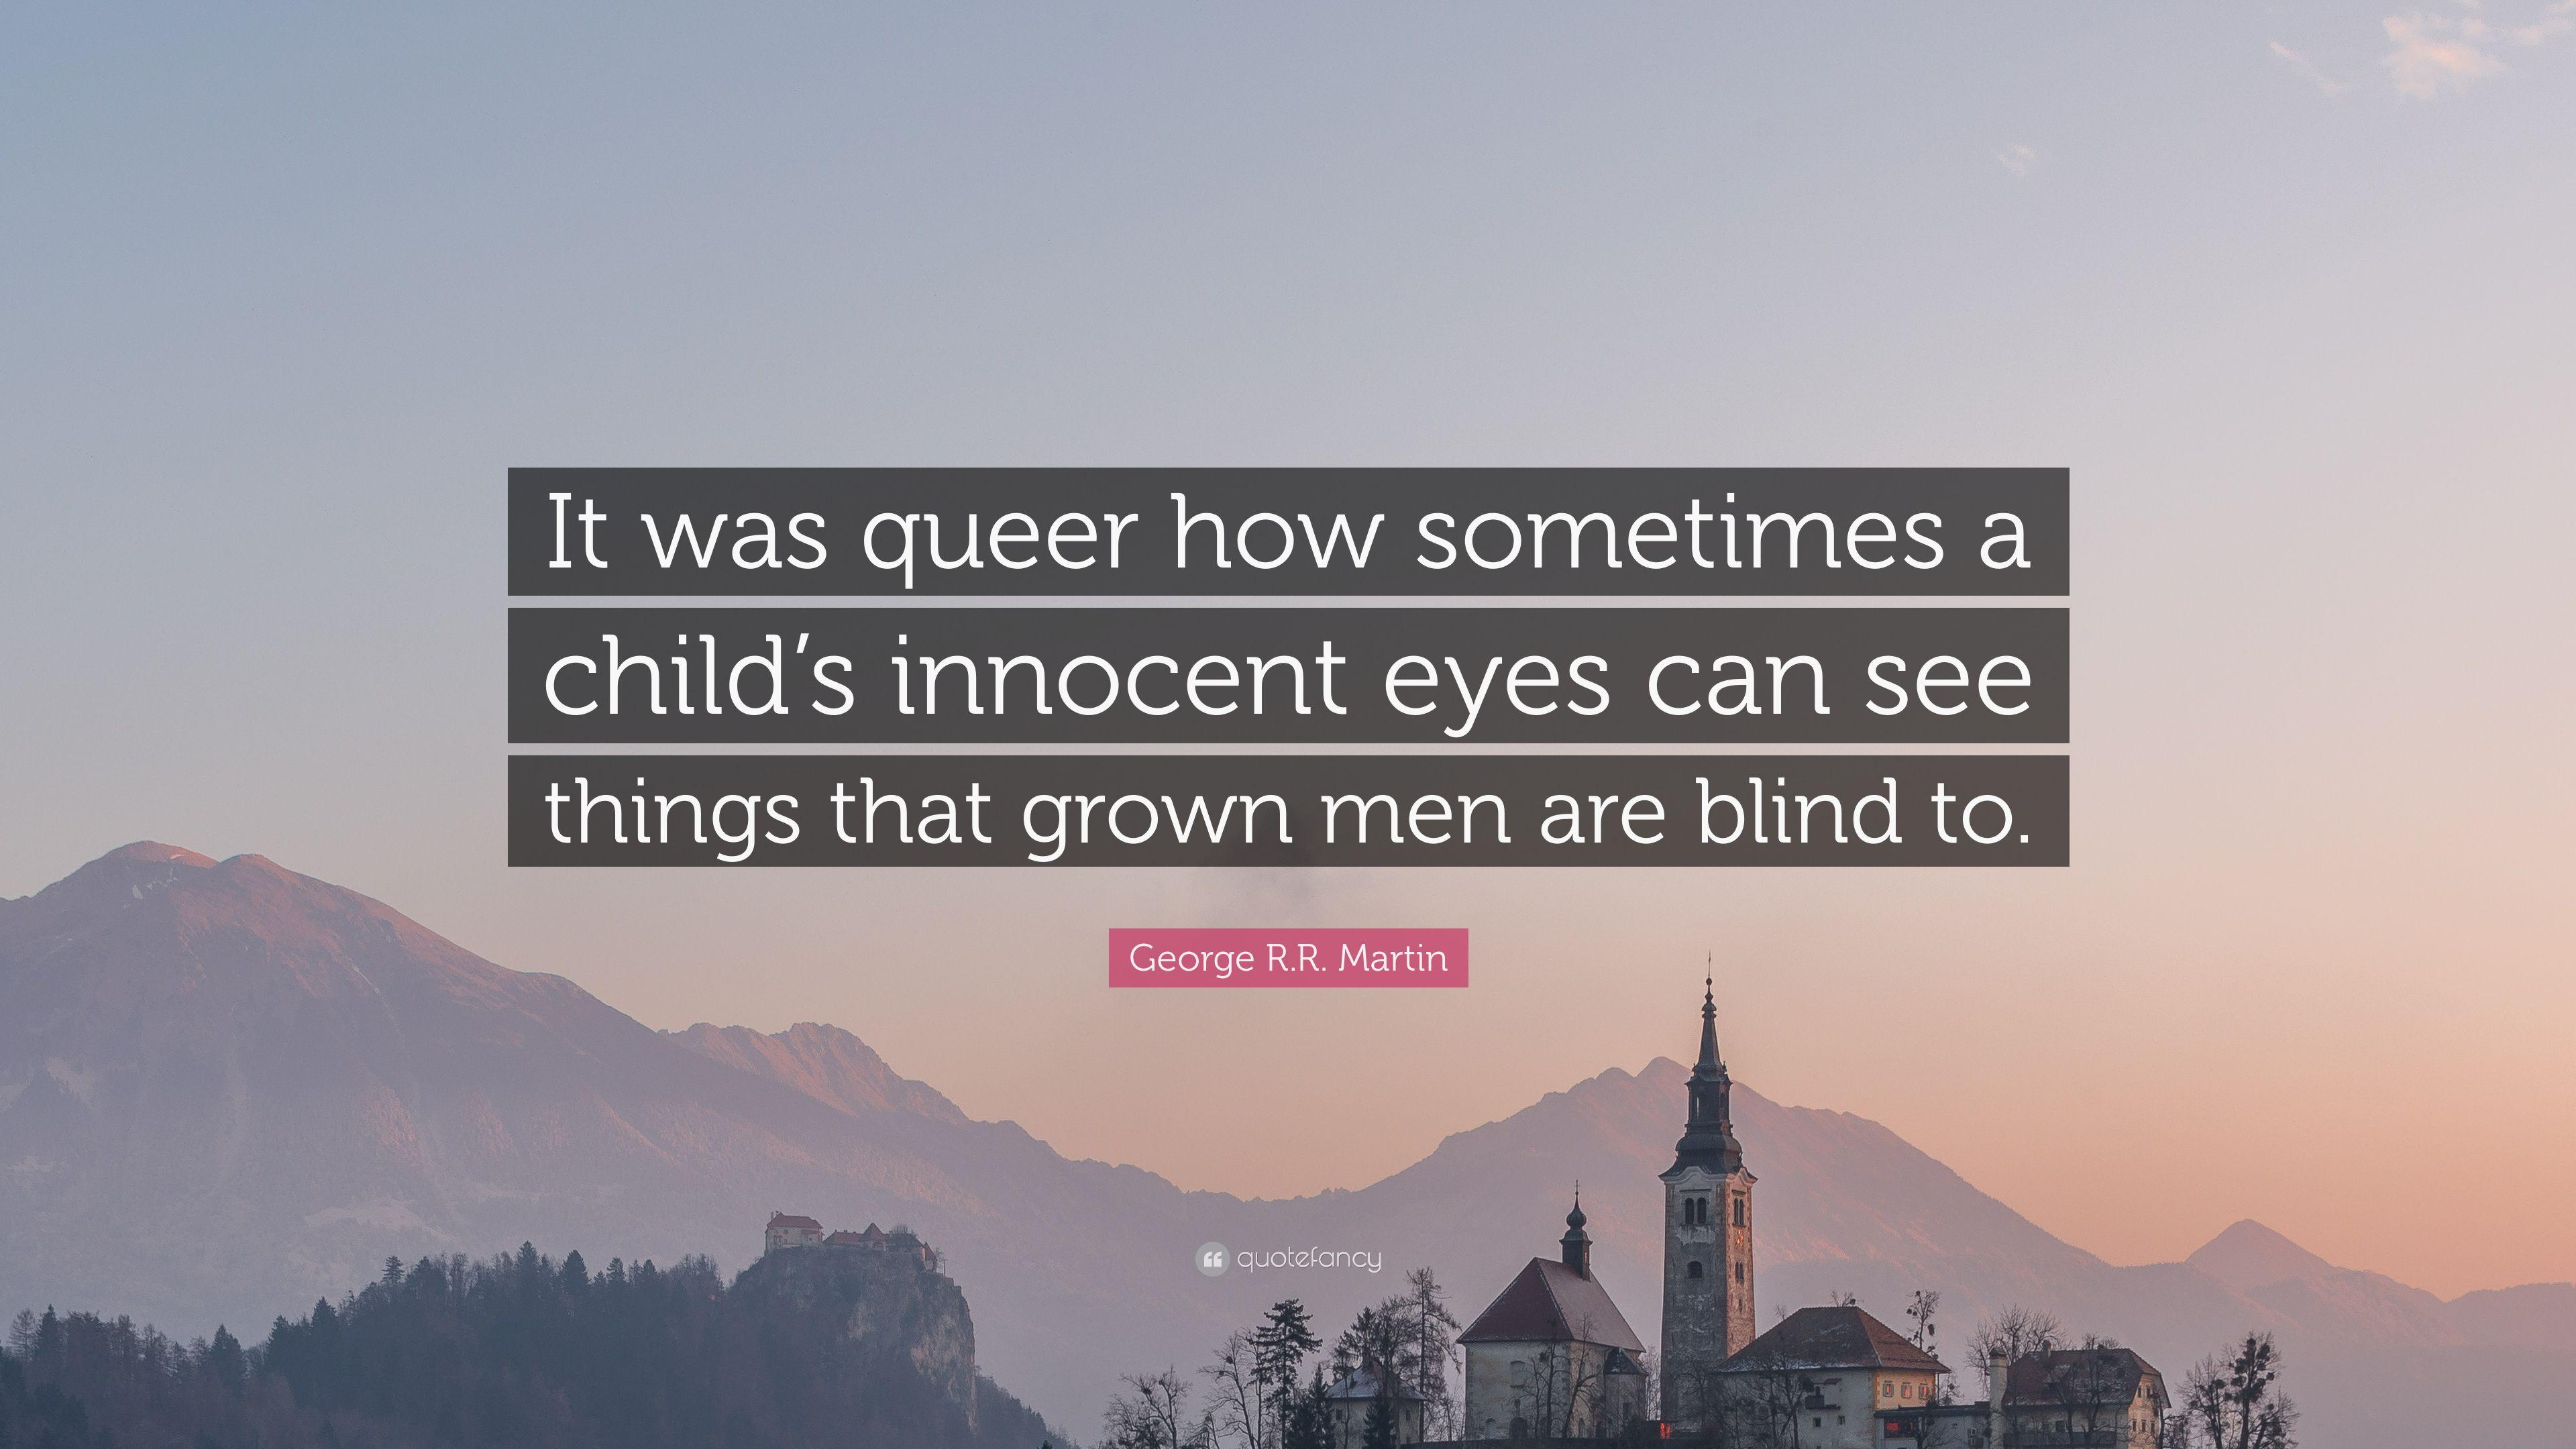 George R.R. Martin Quote: “It was queer how sometimes a child's